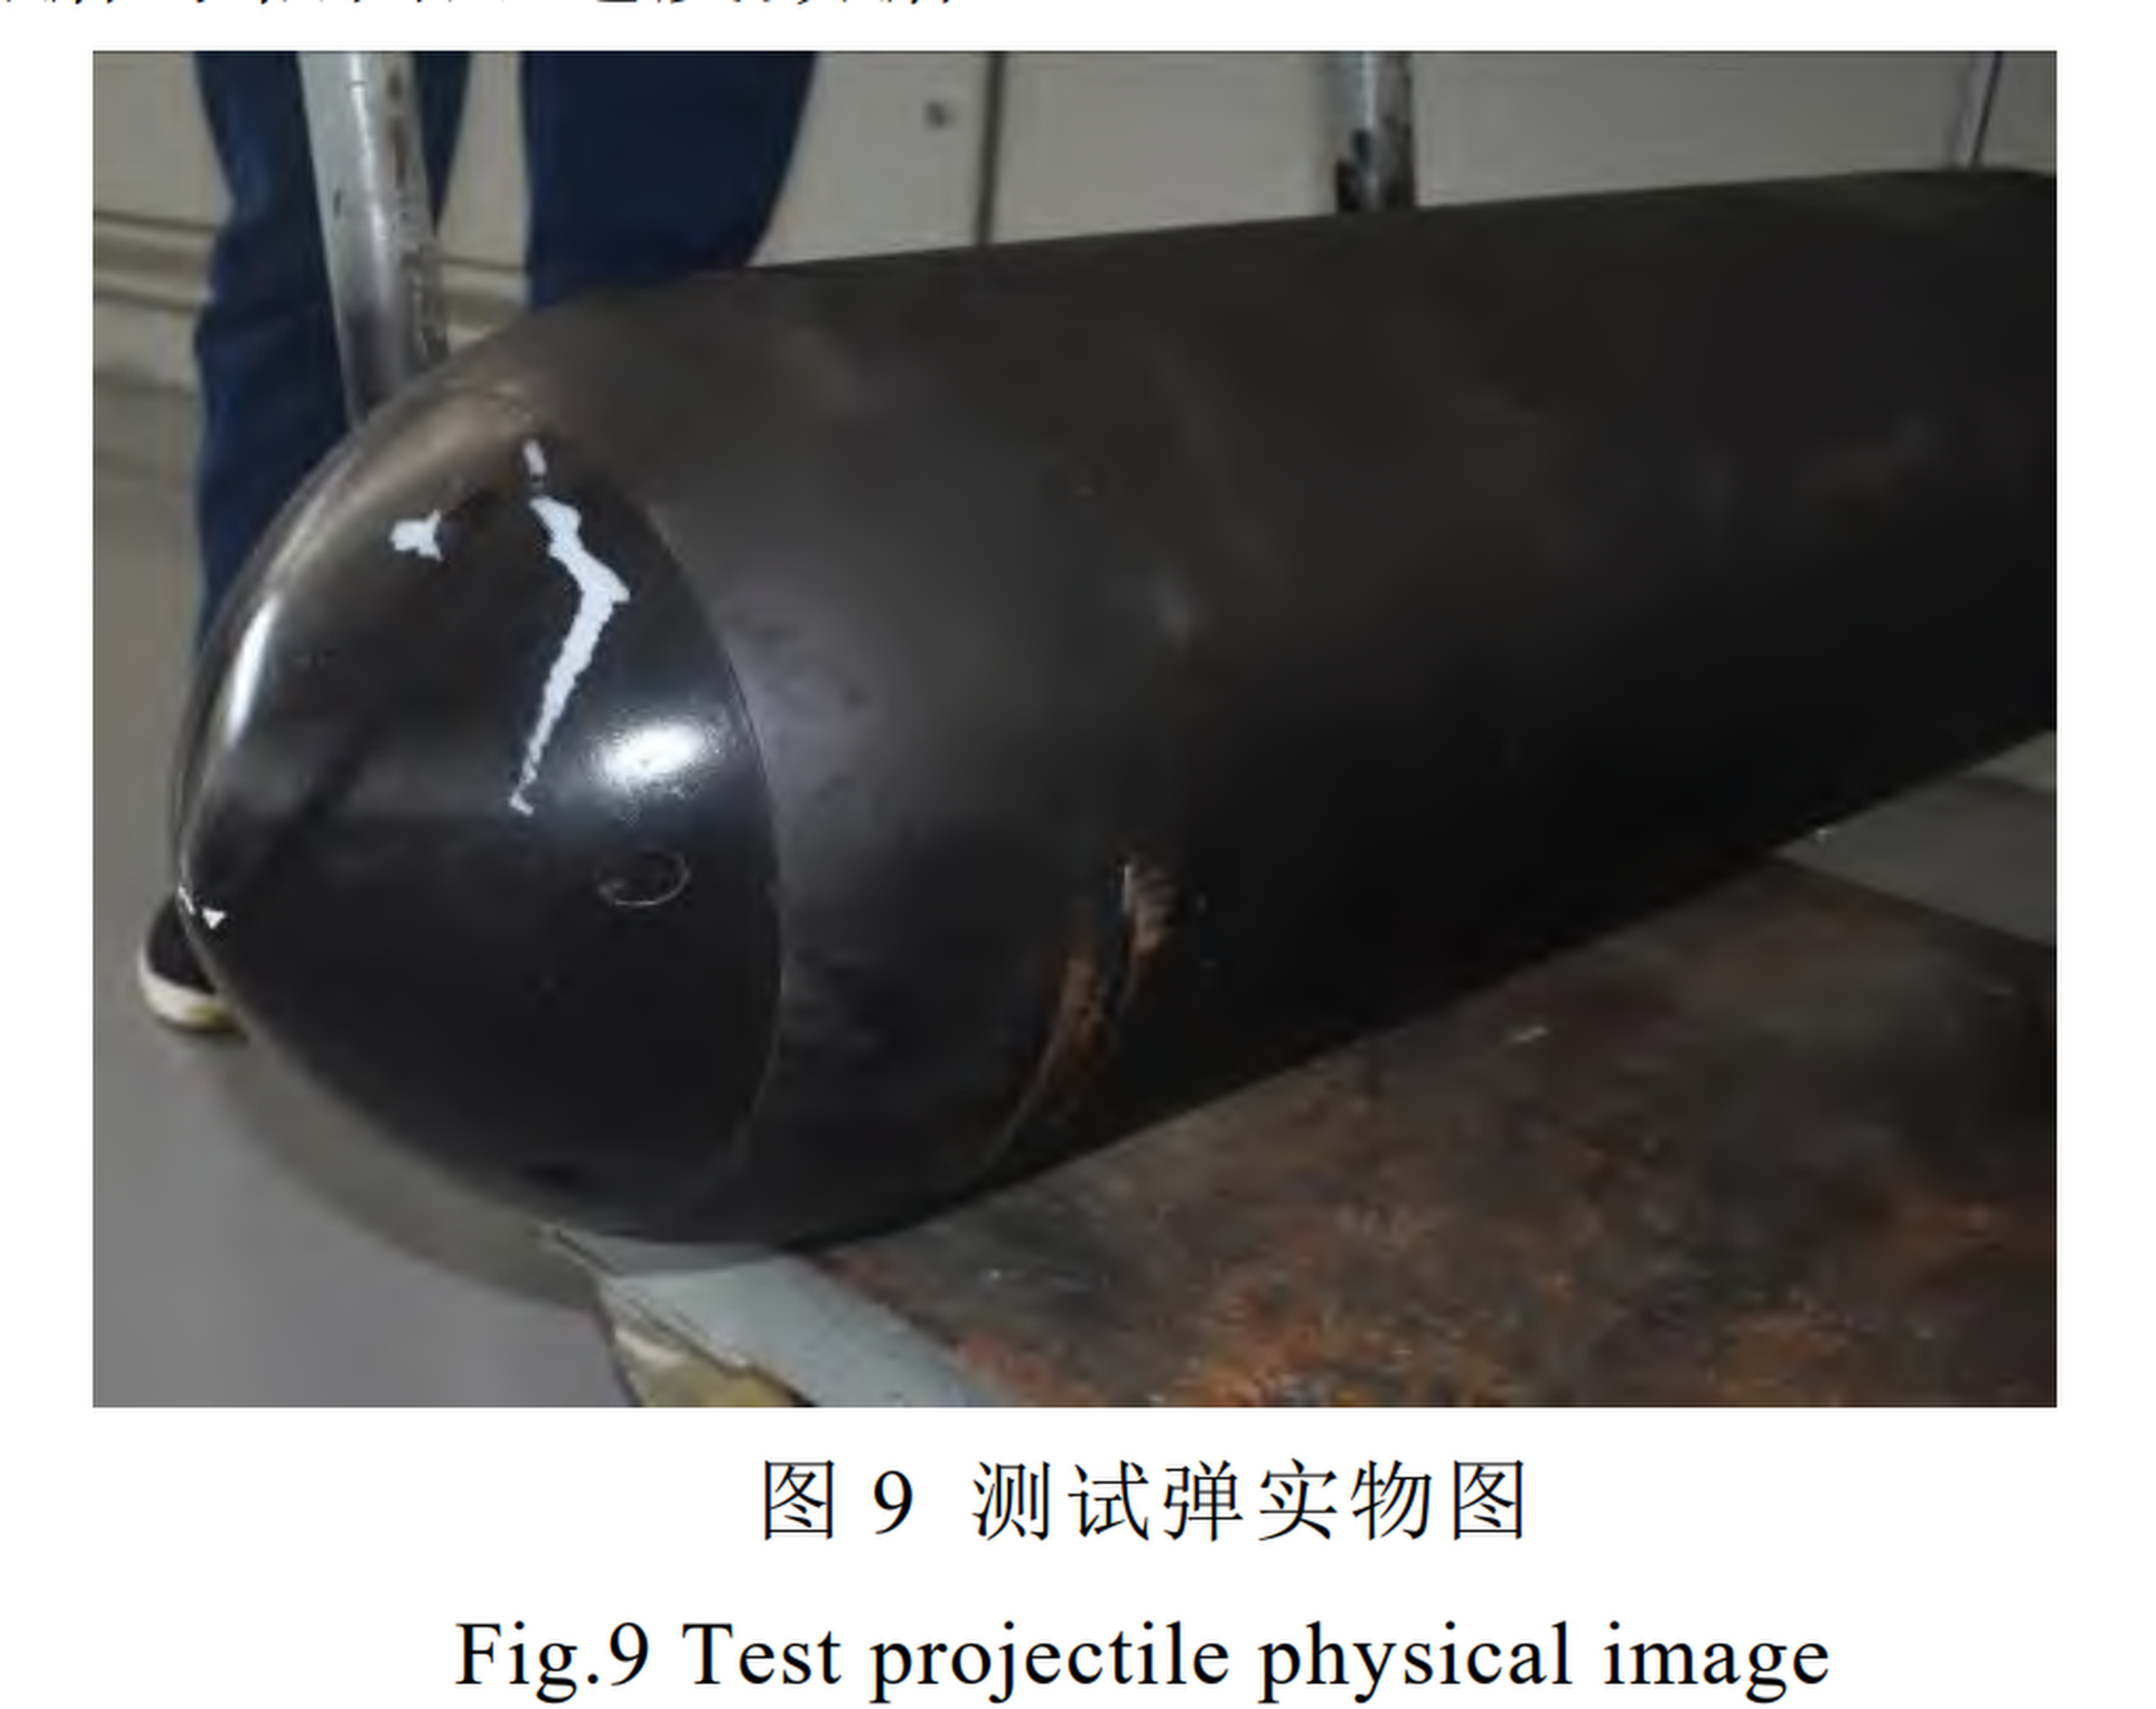 What is the heaviest projectile ever successfully used in battle